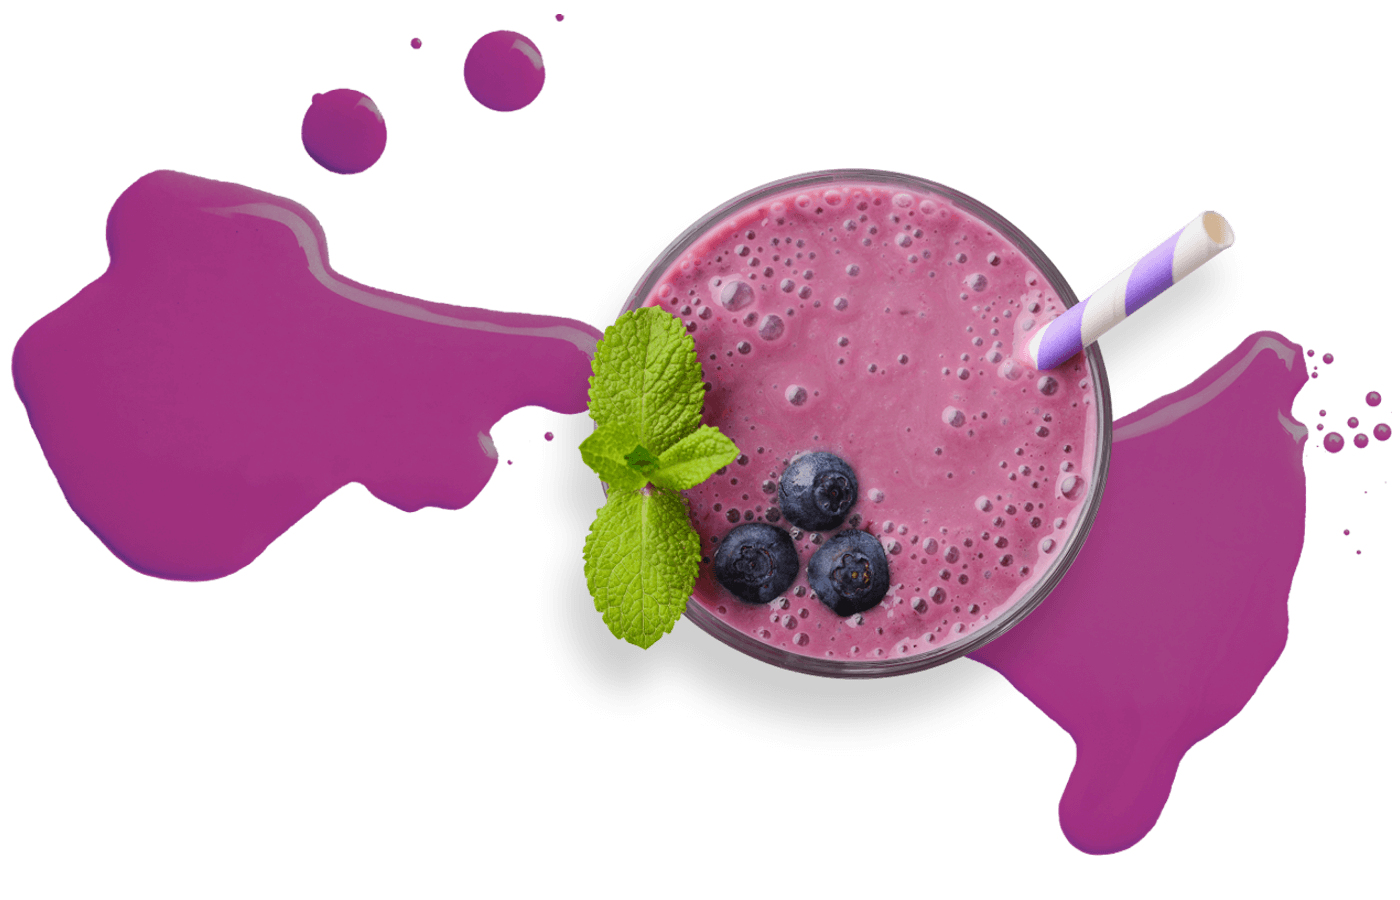 https://www.boomgelato.it/wp-content/uploads/2017/09/smoothie_03.png